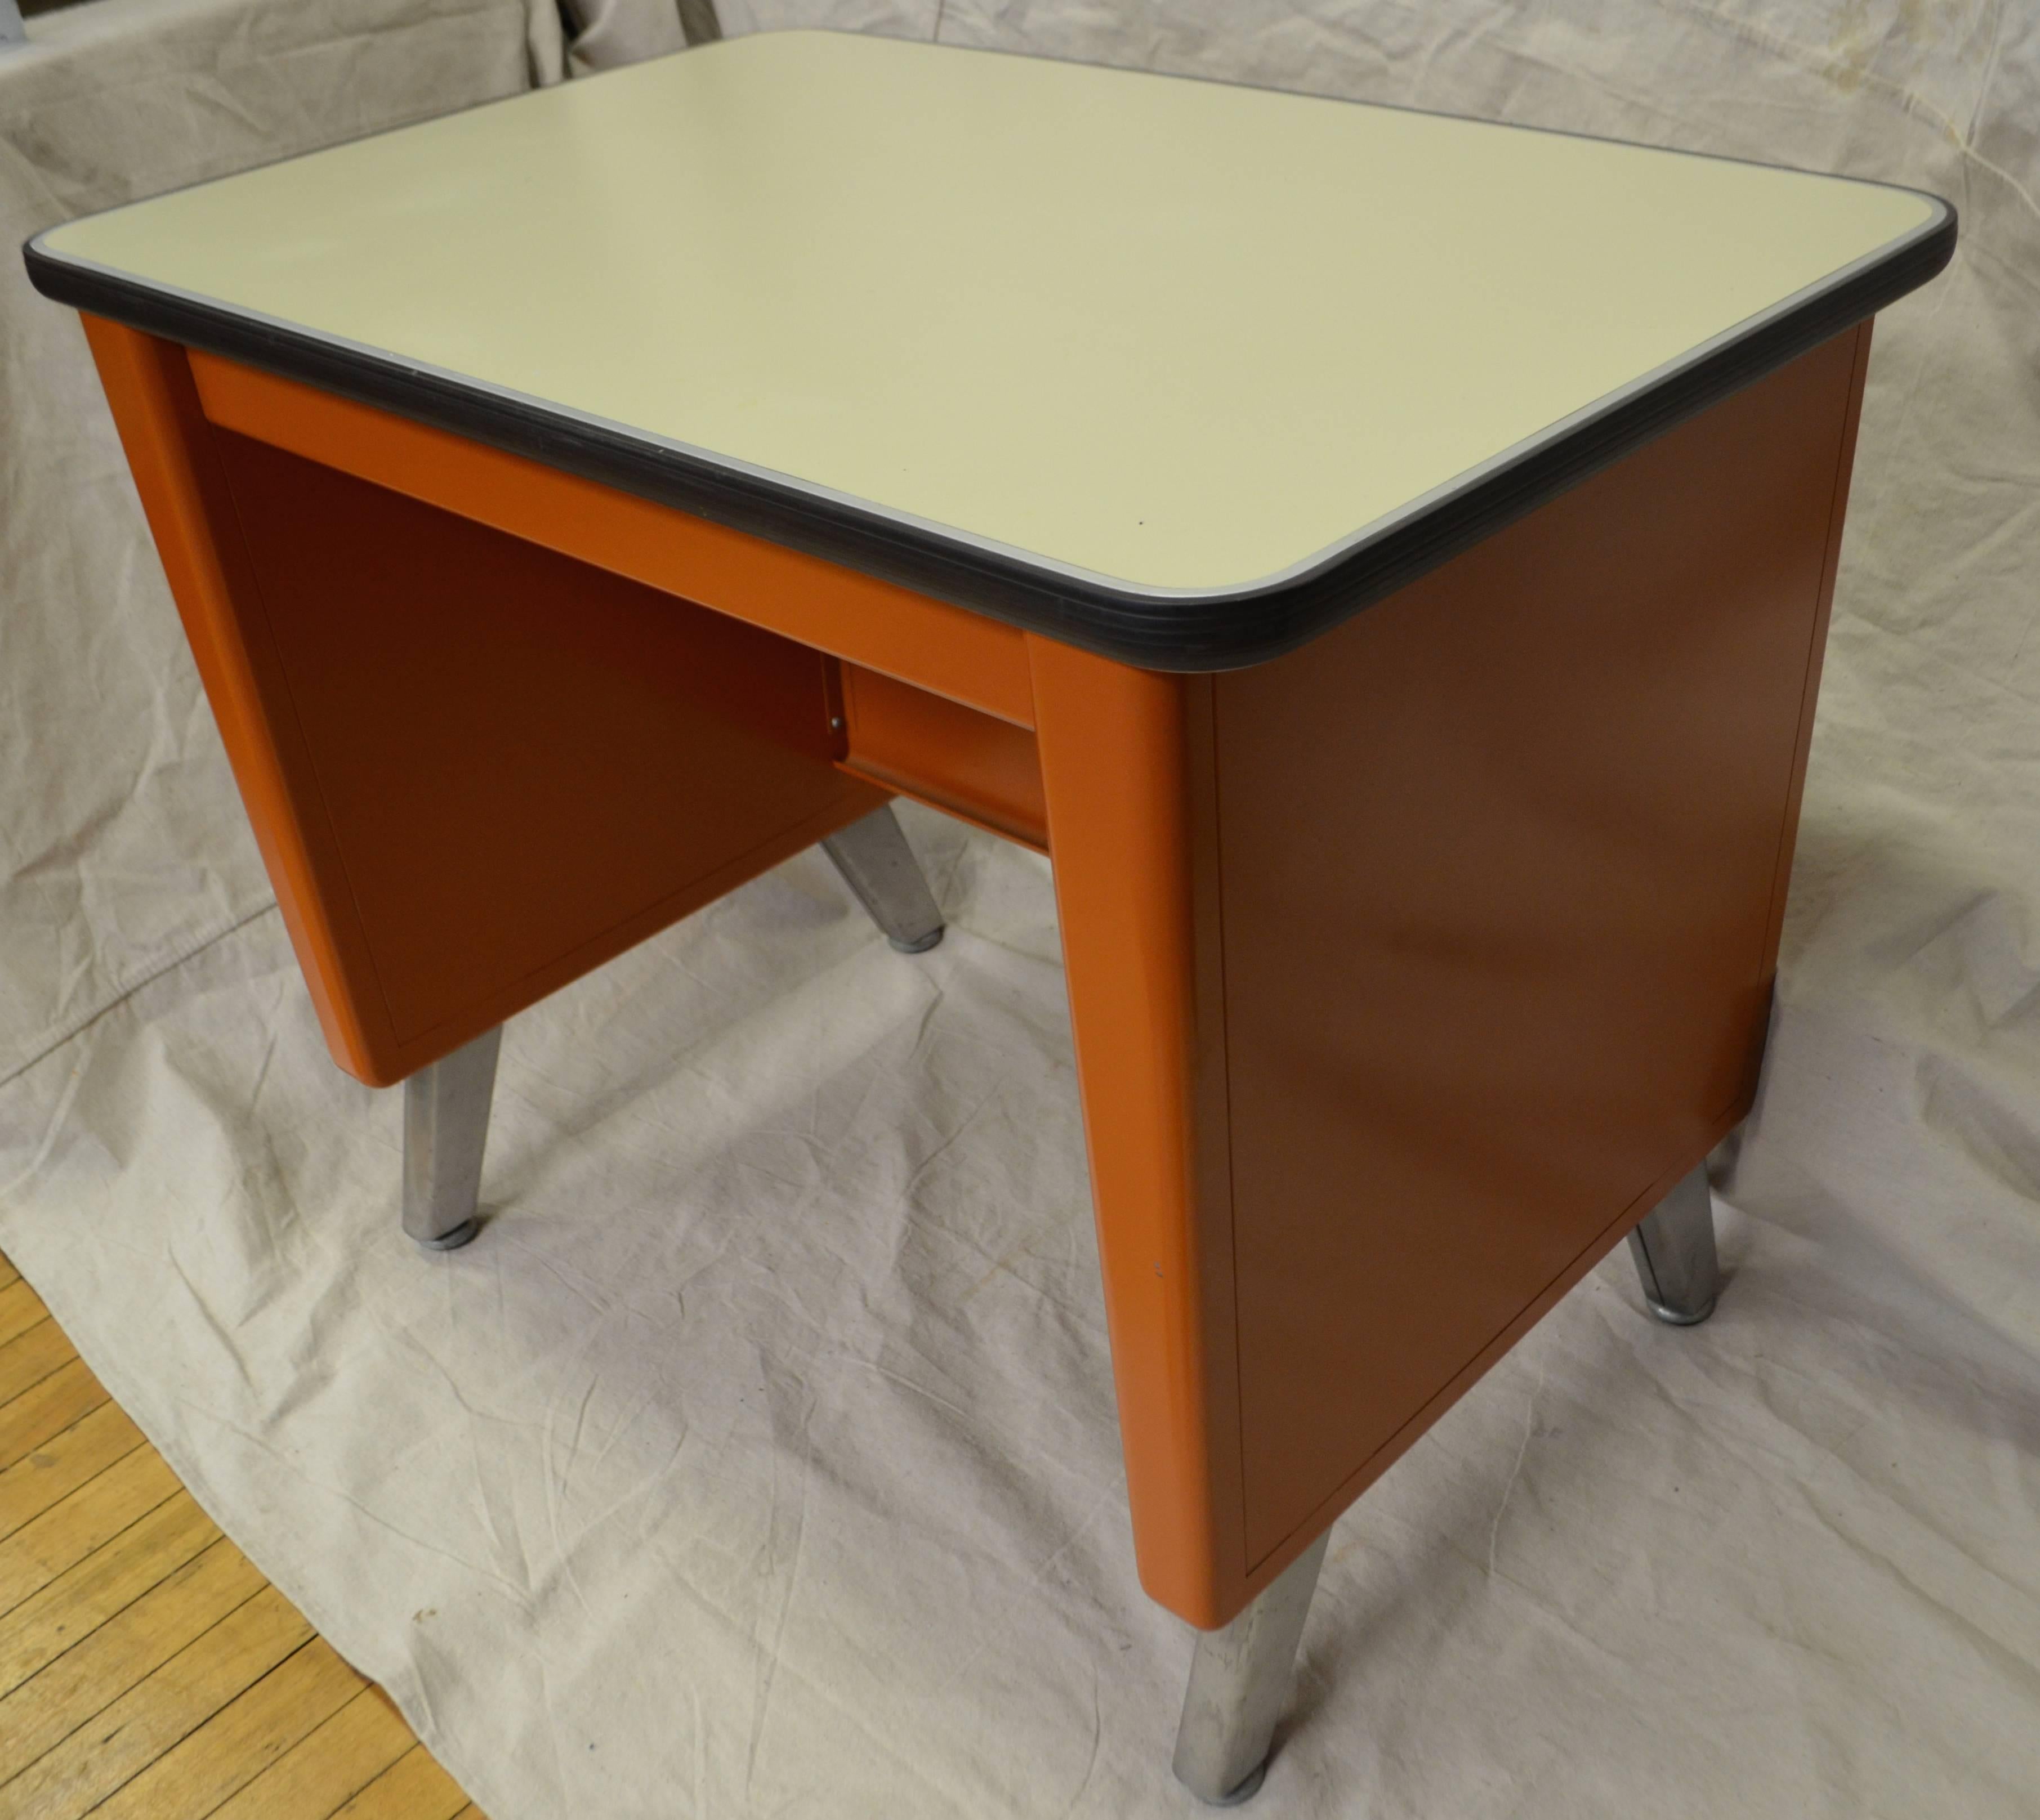 Tanker desks were one of the hottest things going (and the heaviest) in Mid-Century office decor. This version we’re calling the mini-tanker. Immaculate condition. Lightweight for easy moving and relocation around the home. Fits nicely in its own